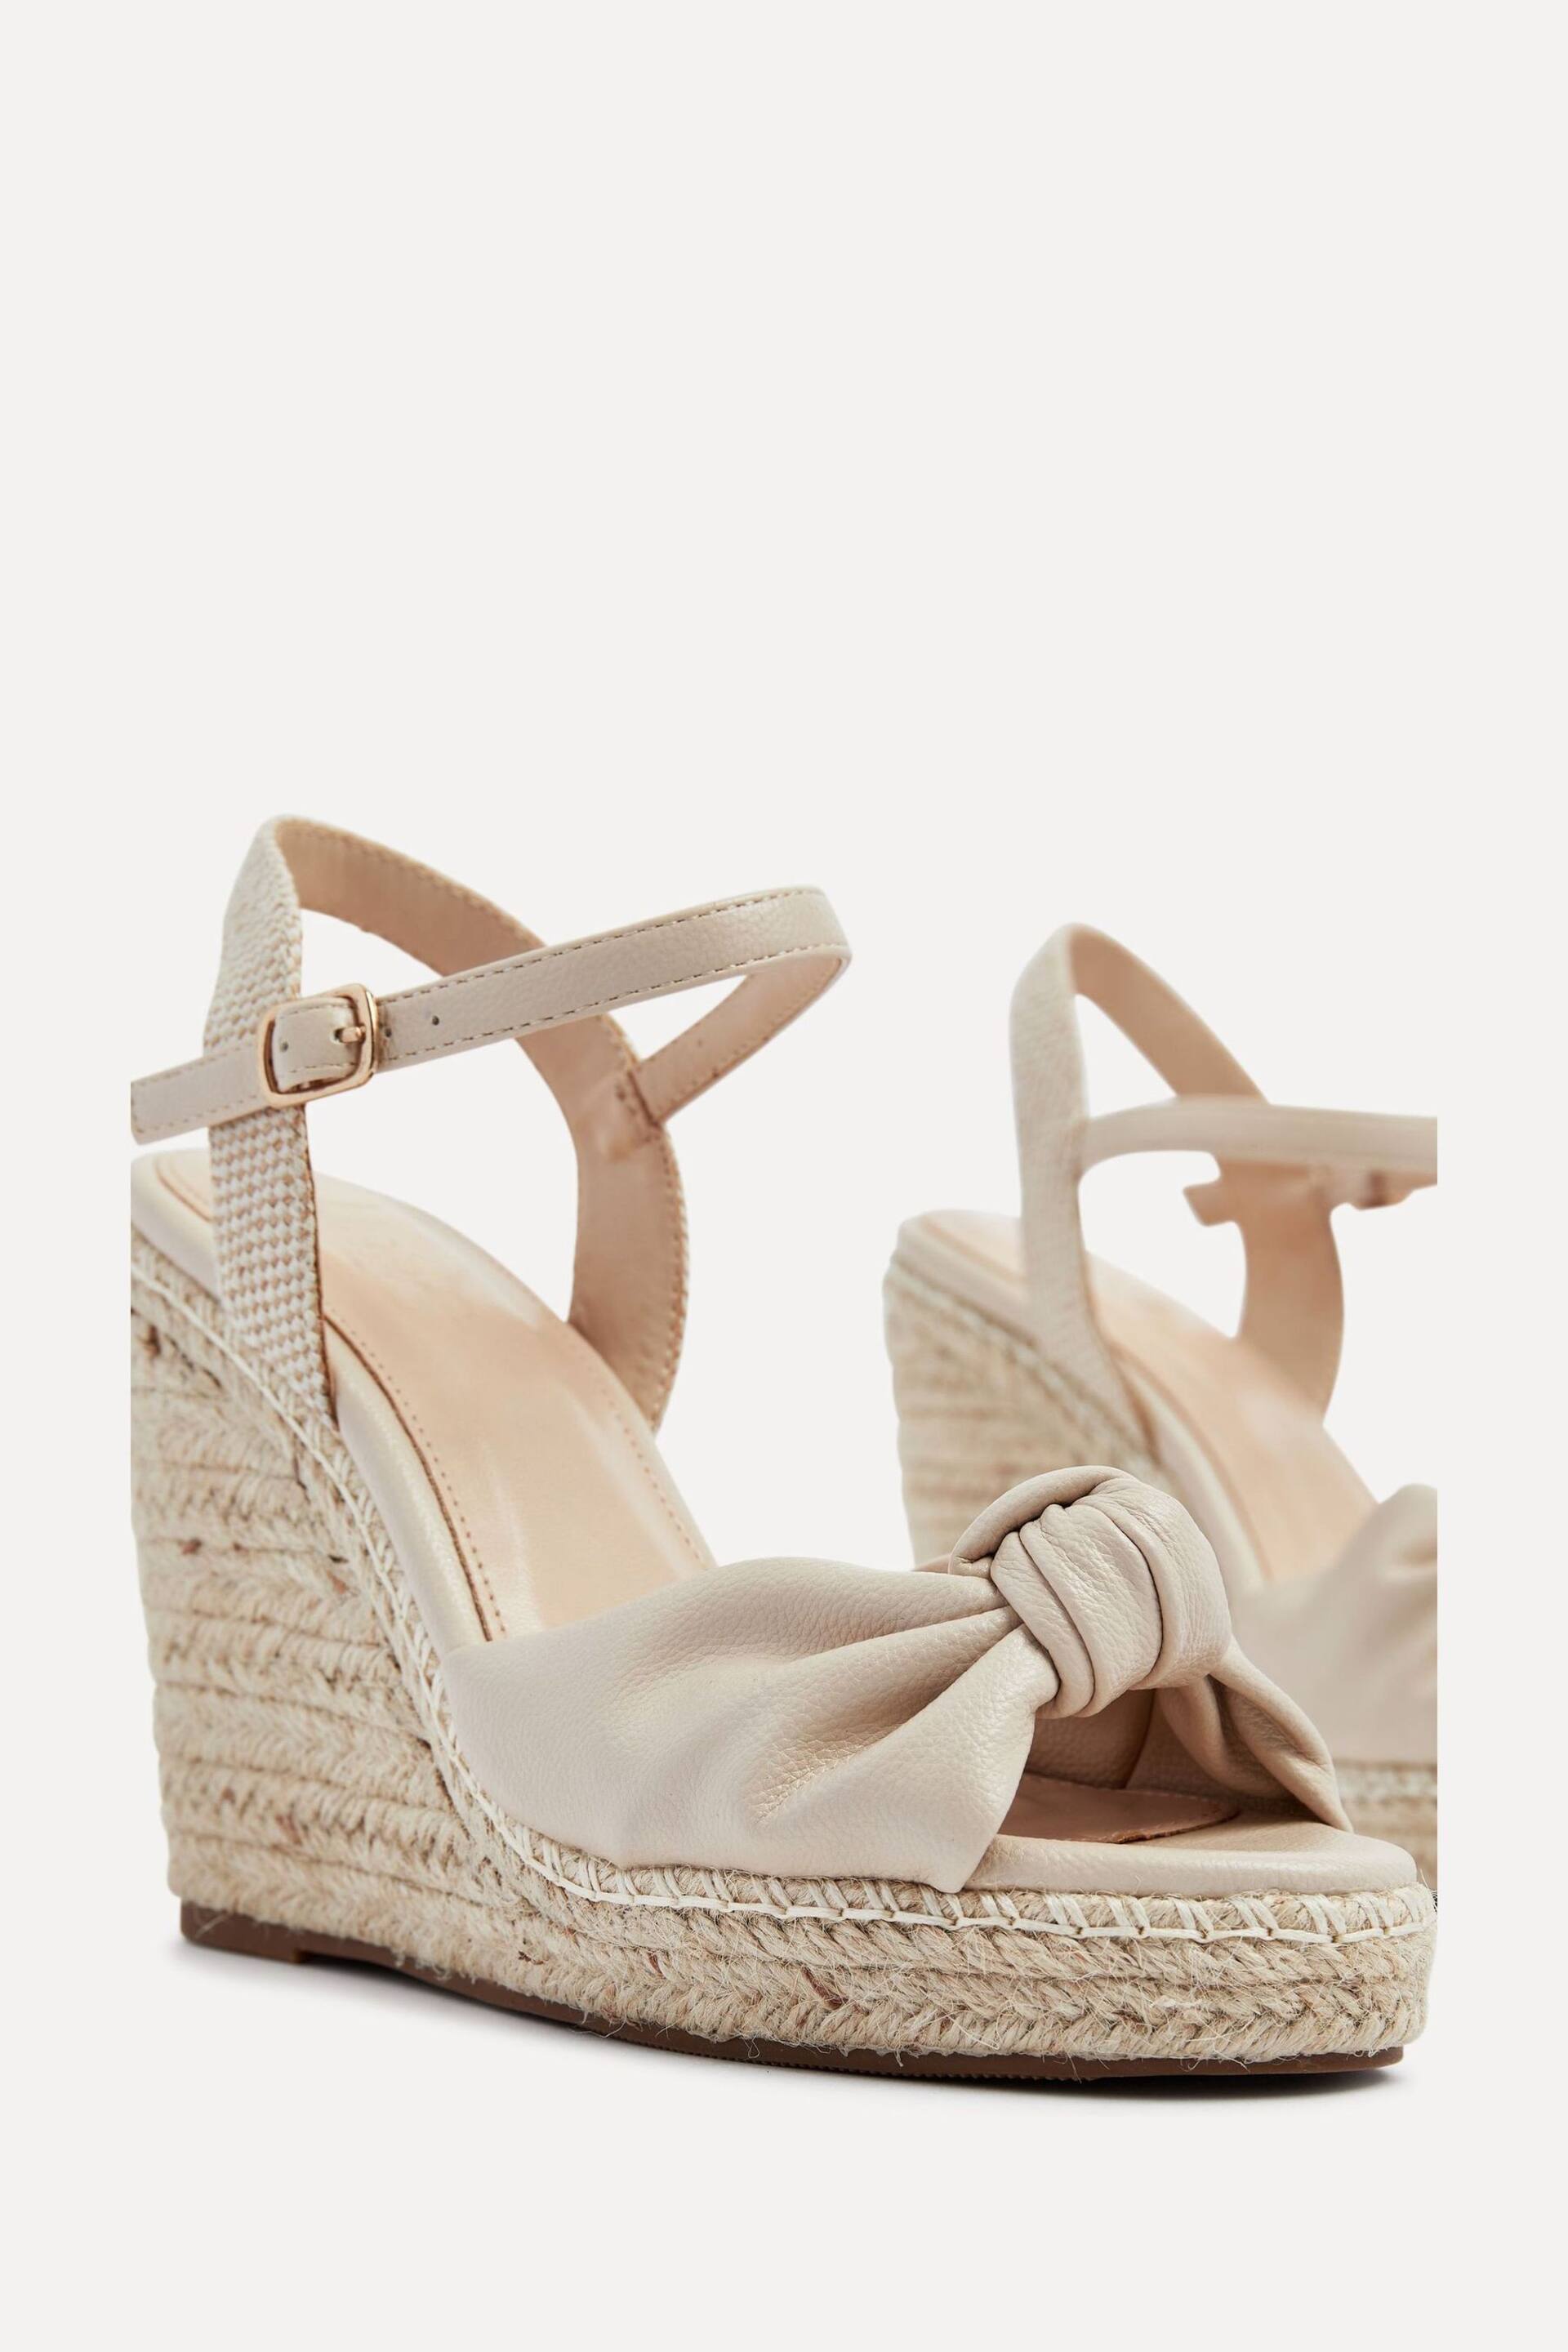 Linzi Cream Rio Rope Platform Wedge Espadrille With Knotted Front Strap - Image 5 of 5